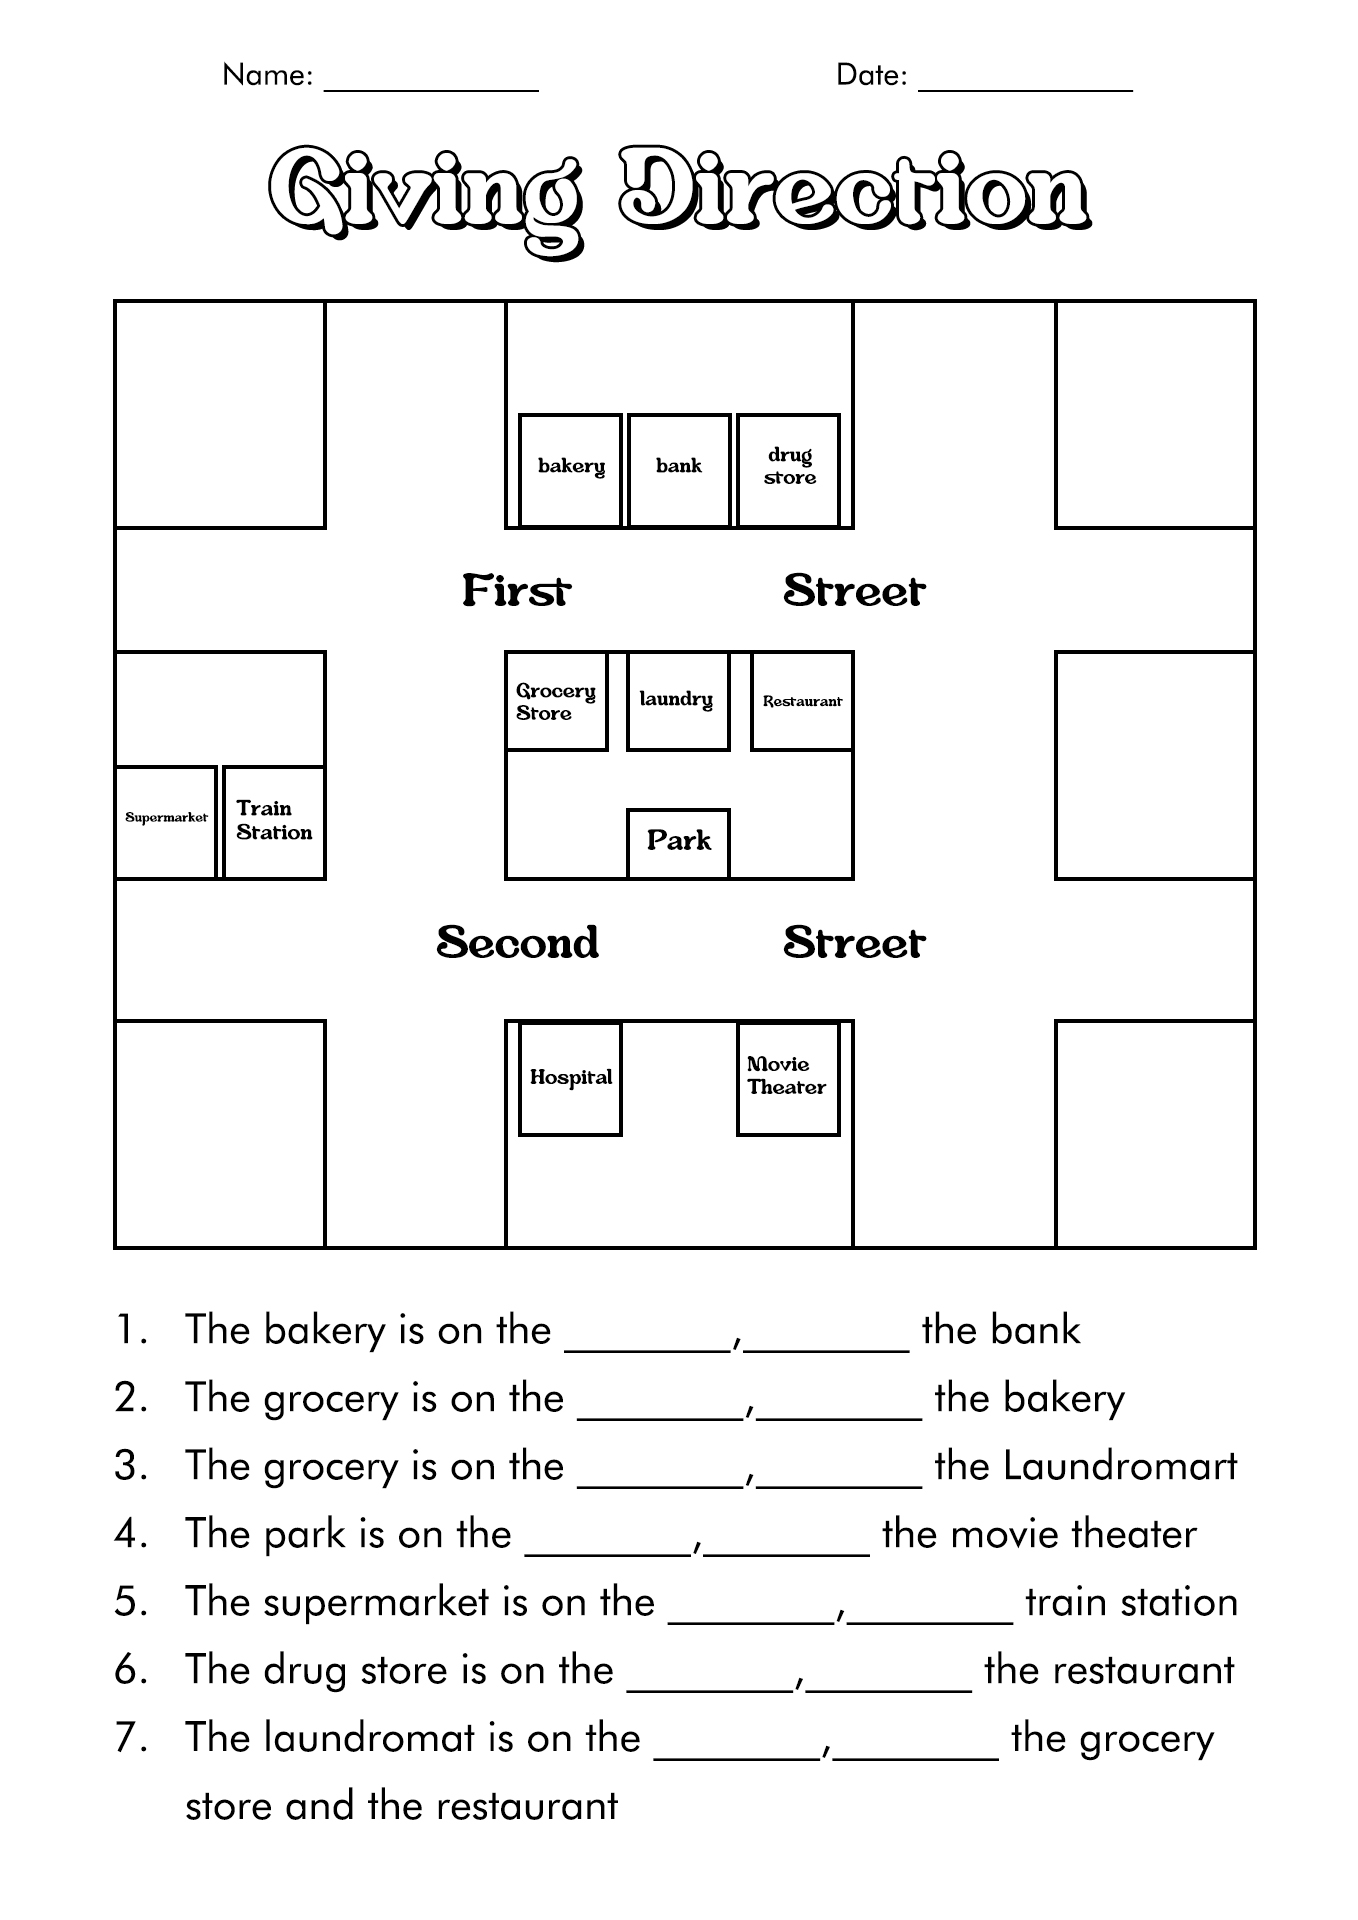 free-following-directions-worksheets-pdf-free-download-qstion-co-2022